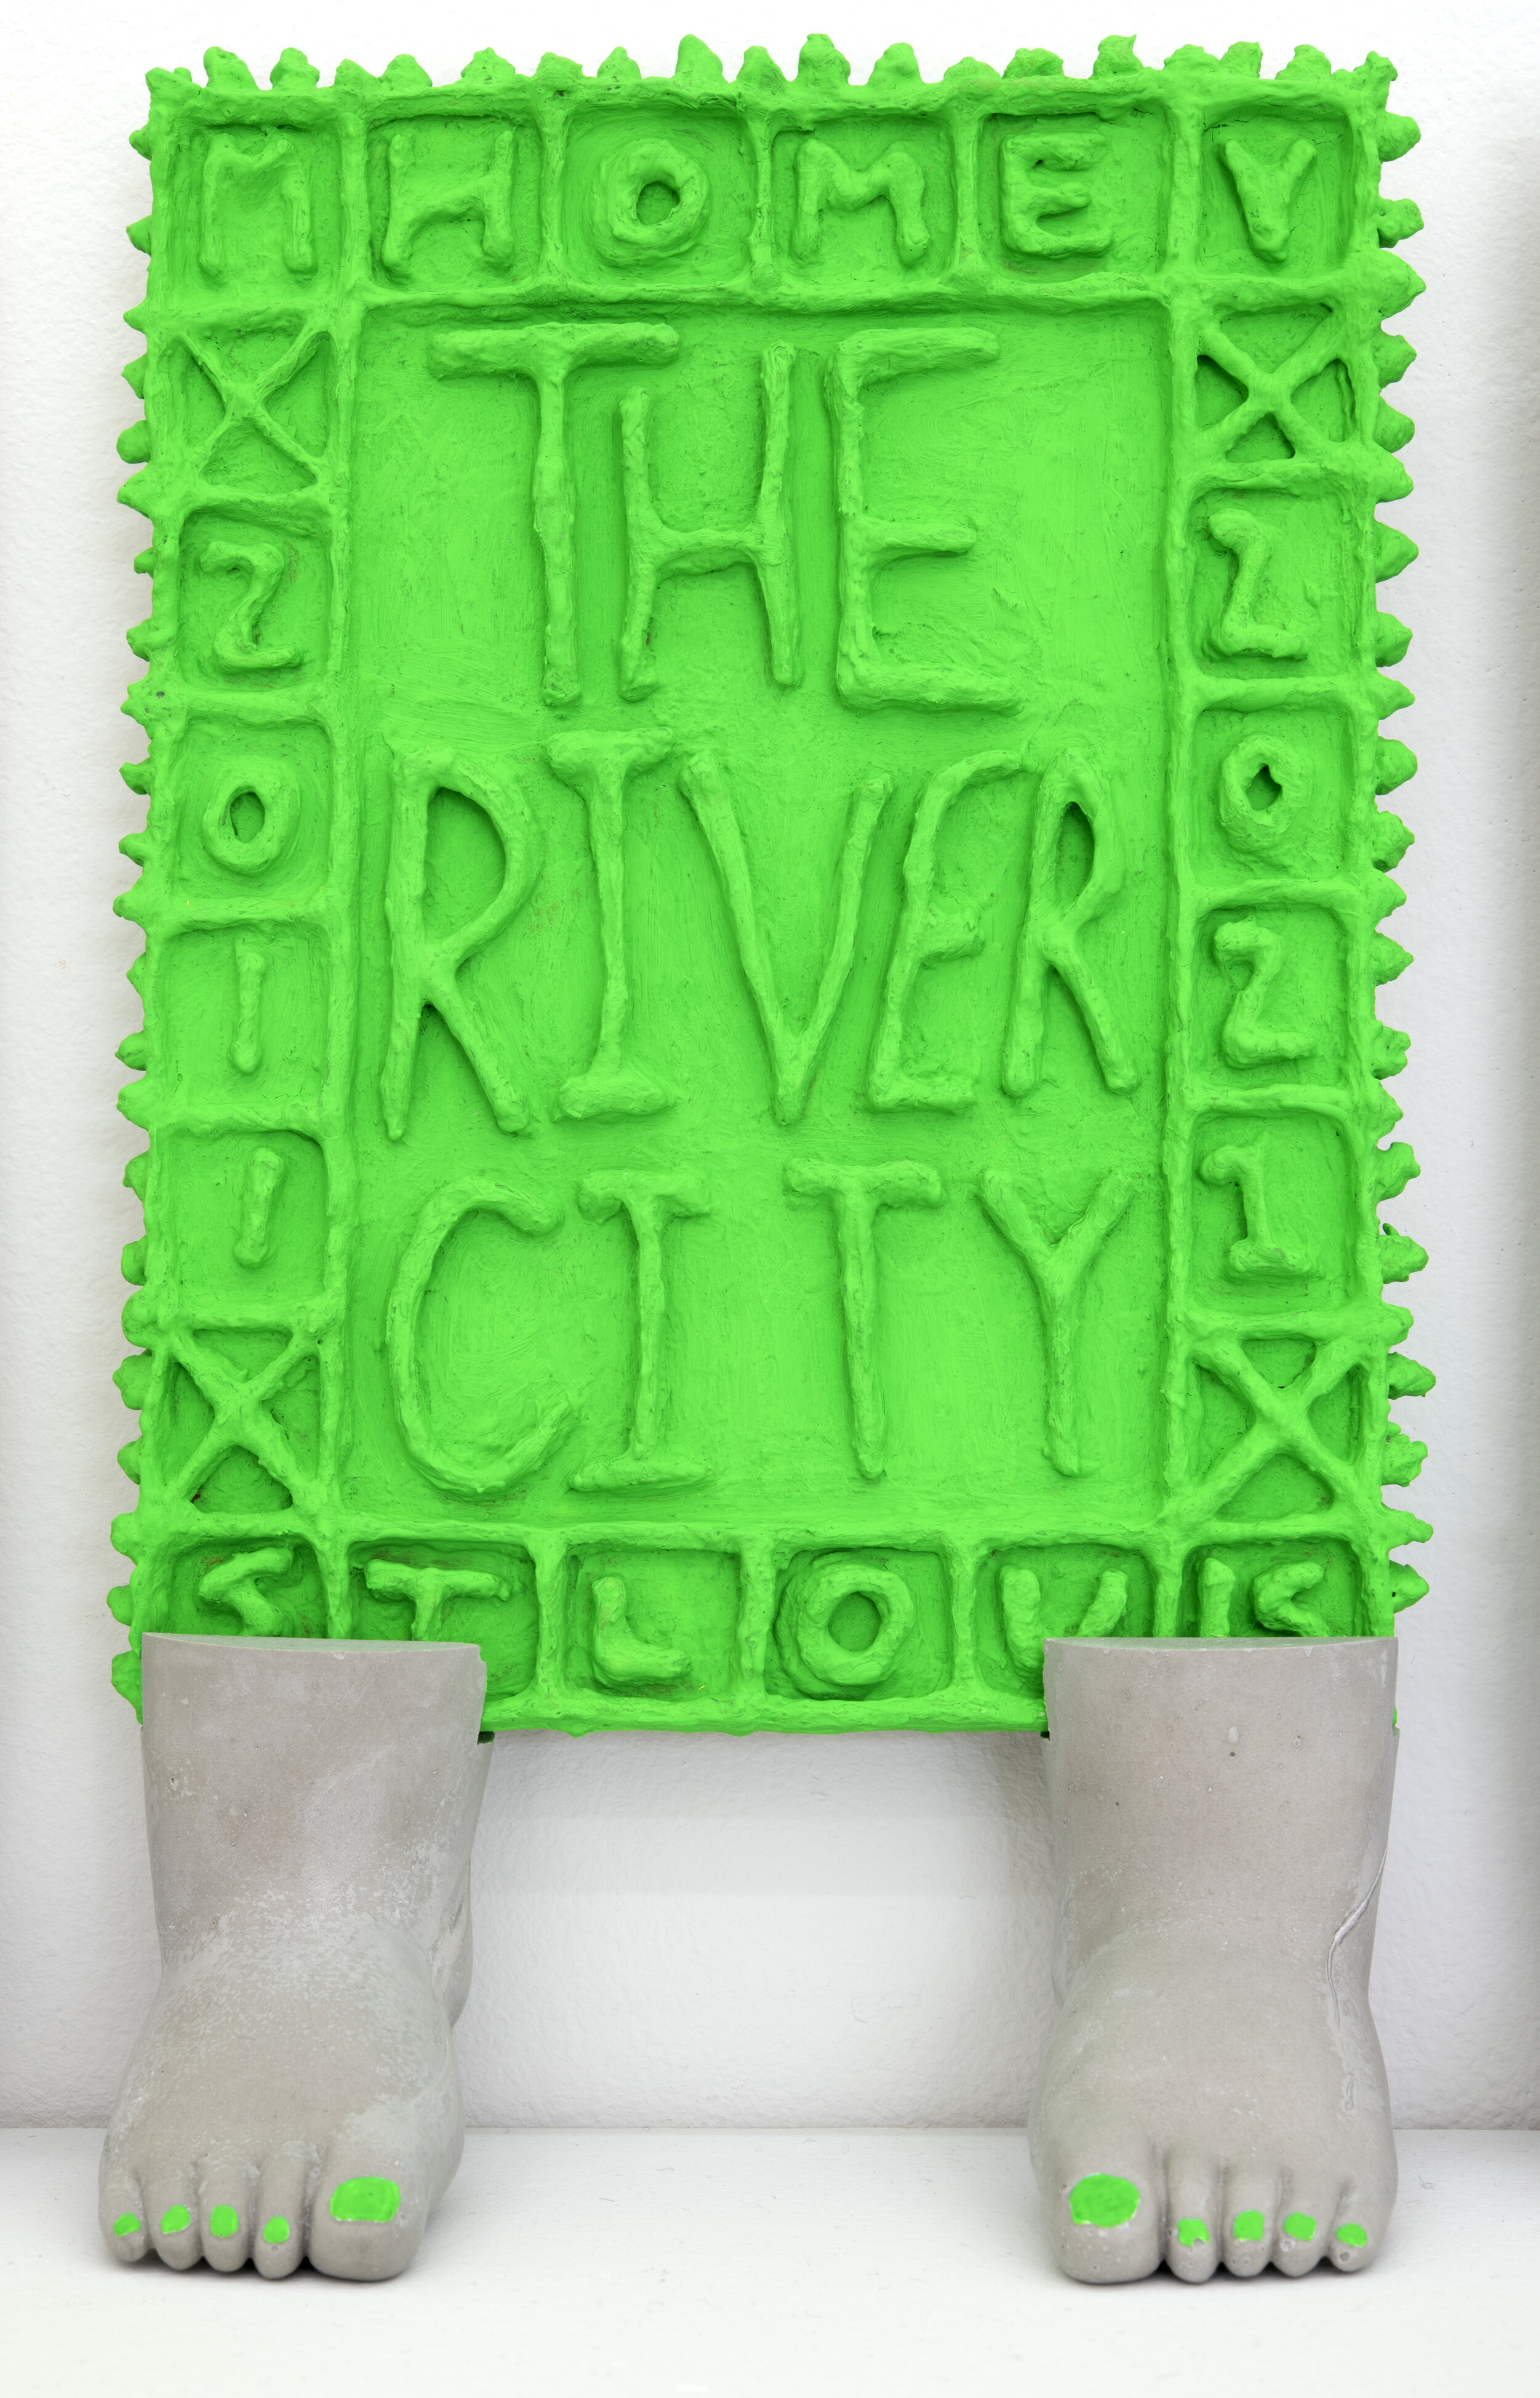 The River City, St. Louis: My Home 2011-2021 (Light Green) 